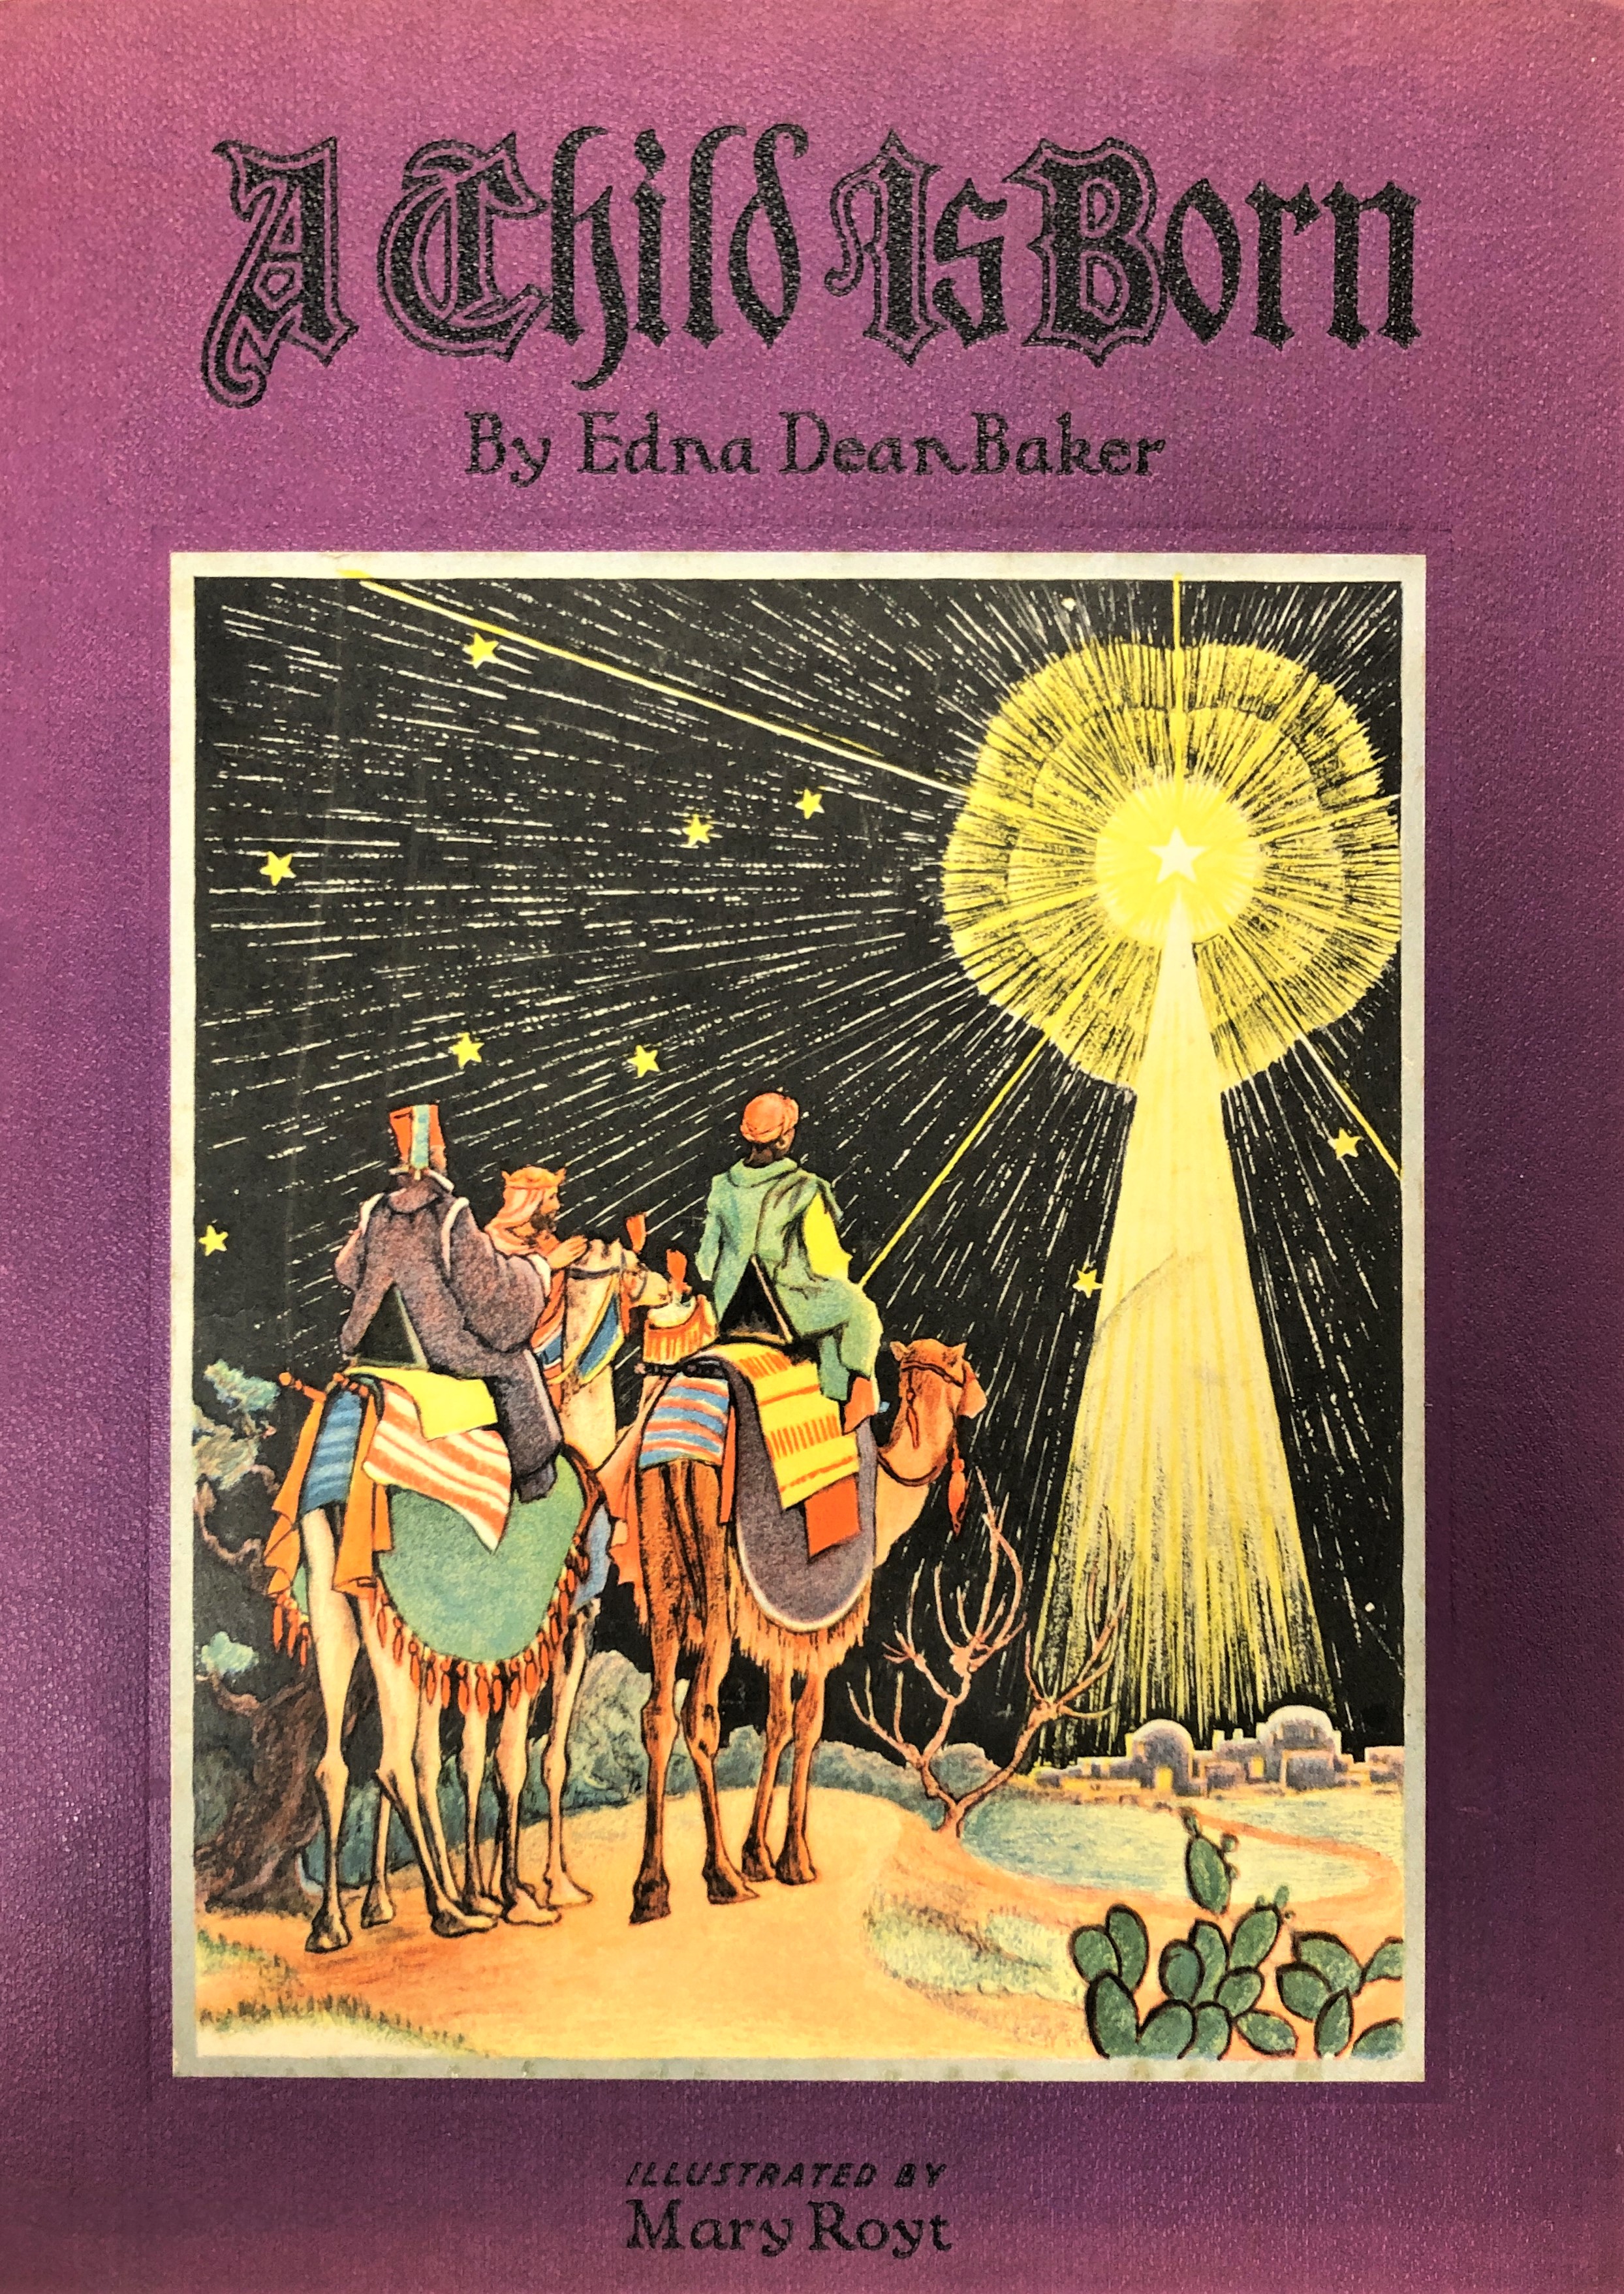 Cover of “A Child Is Born: the Story for Children” by Edna Dean Baker; illustrated by Mary Royt (1932). From the Marian Library Juvenile Collection